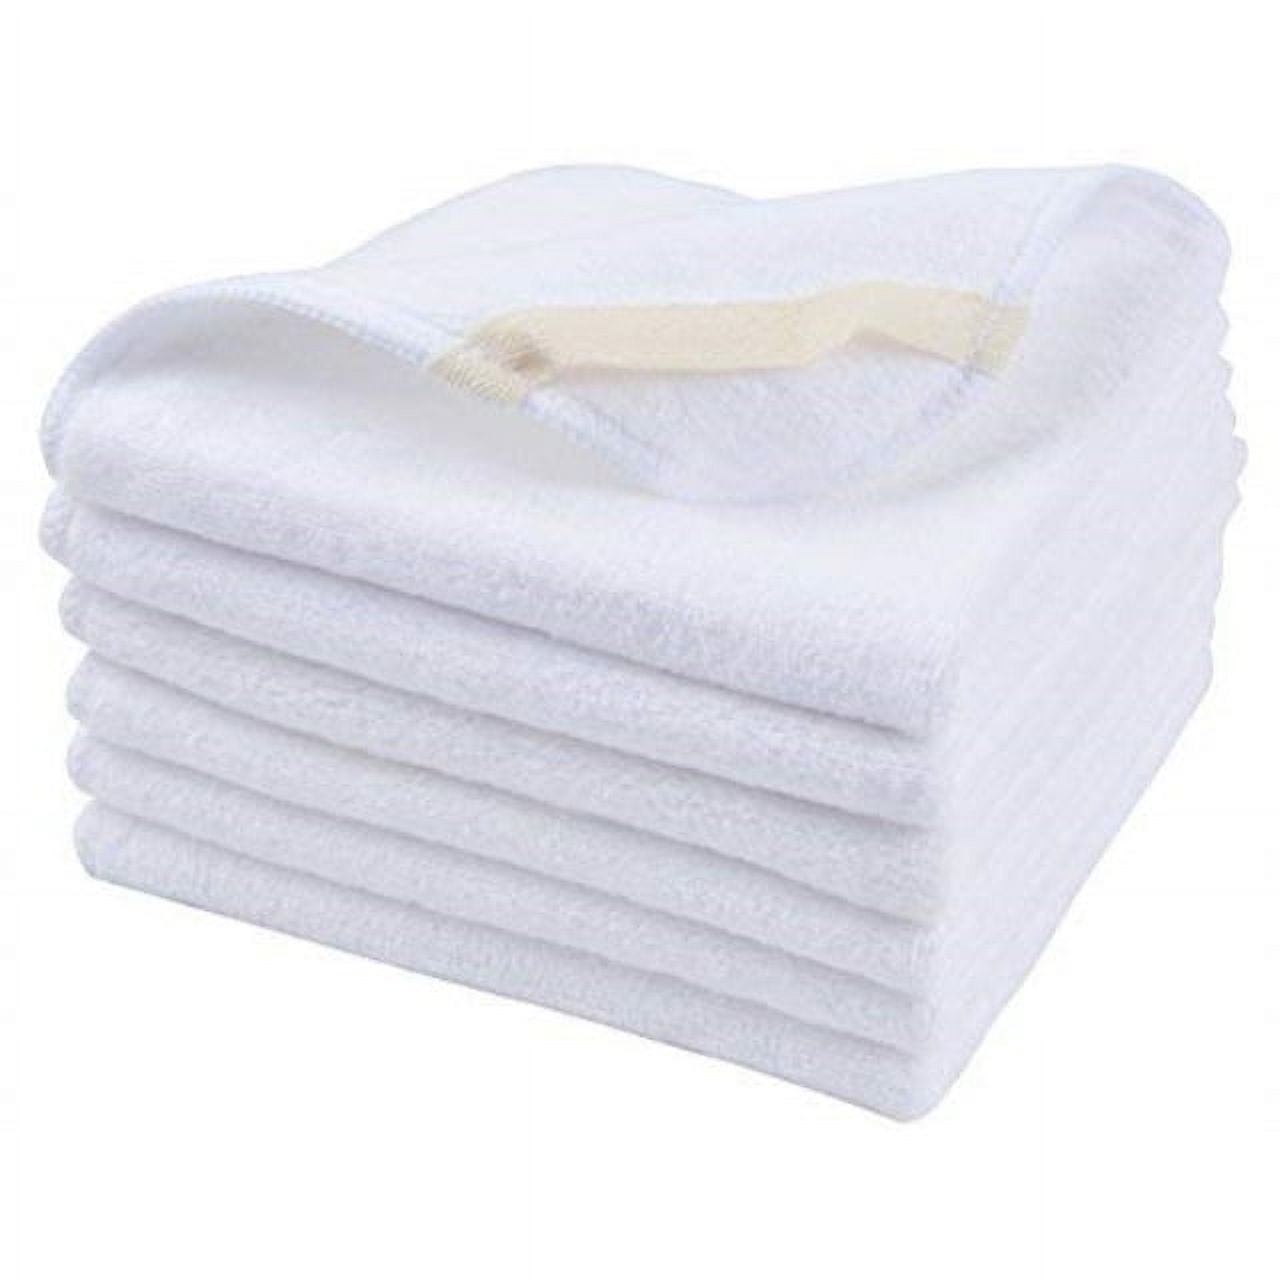 Great Value Microfiber Cleaning Towels, 2 Count, Assorted Colors 